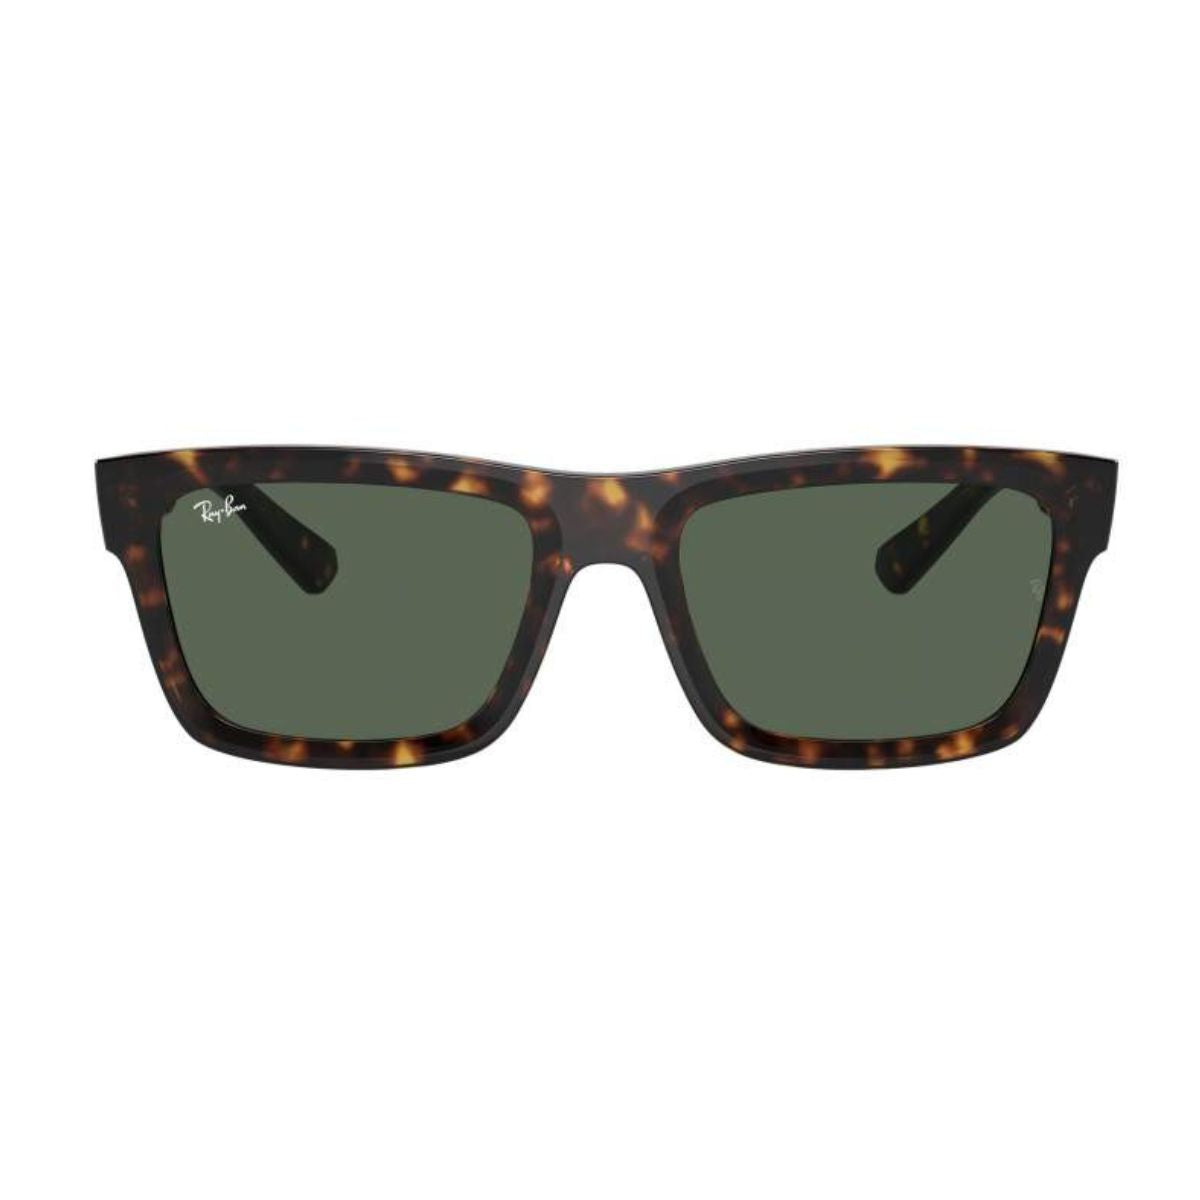 "Buy Rayban 4396 1359/71 Square sunglasses with UV Protection For Men And Women At Optorium"
